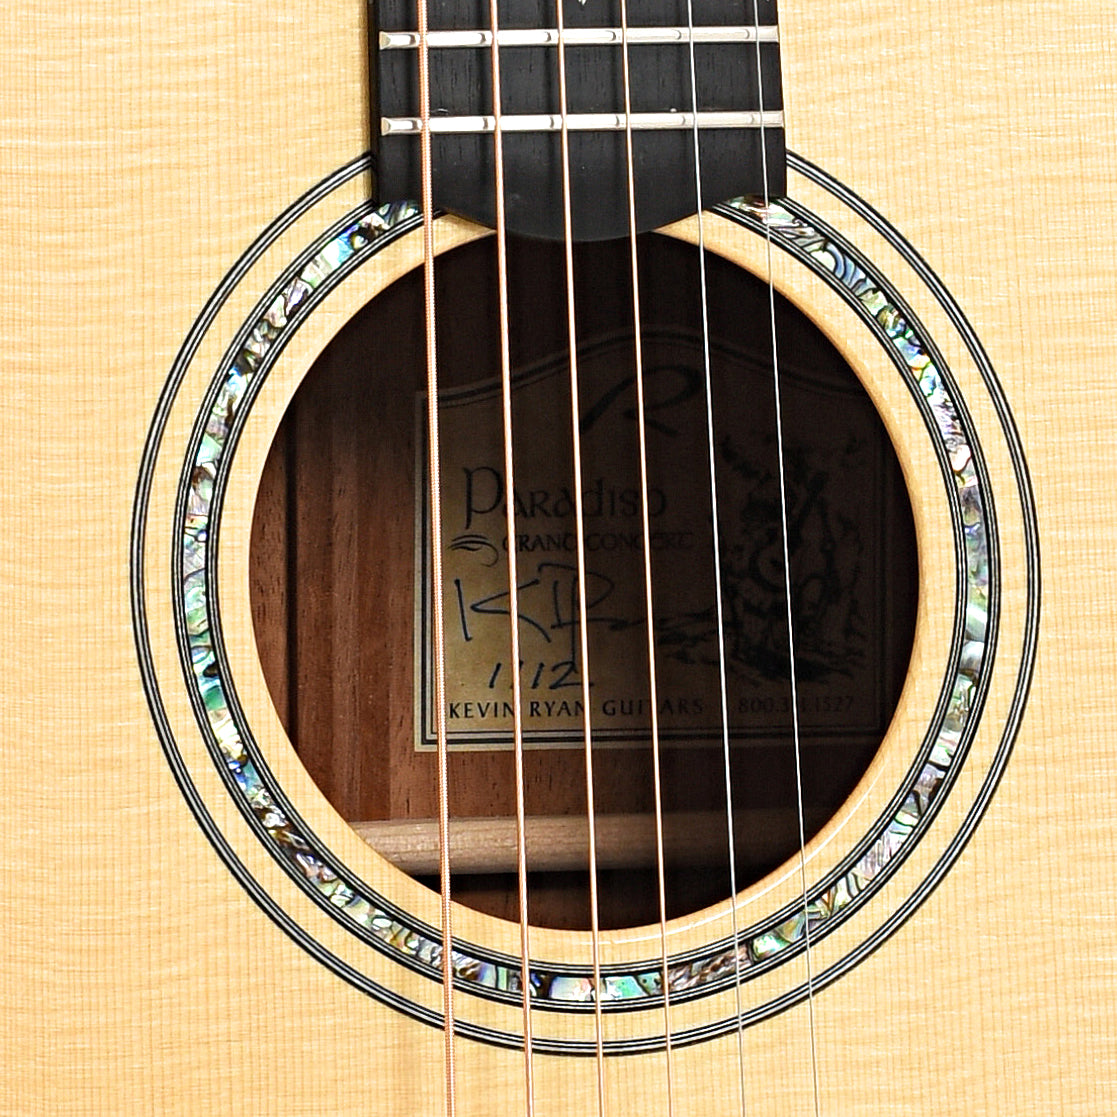 Sound hole of Kevin Ryan Paradiso Grand Concert Acoustic Guitar